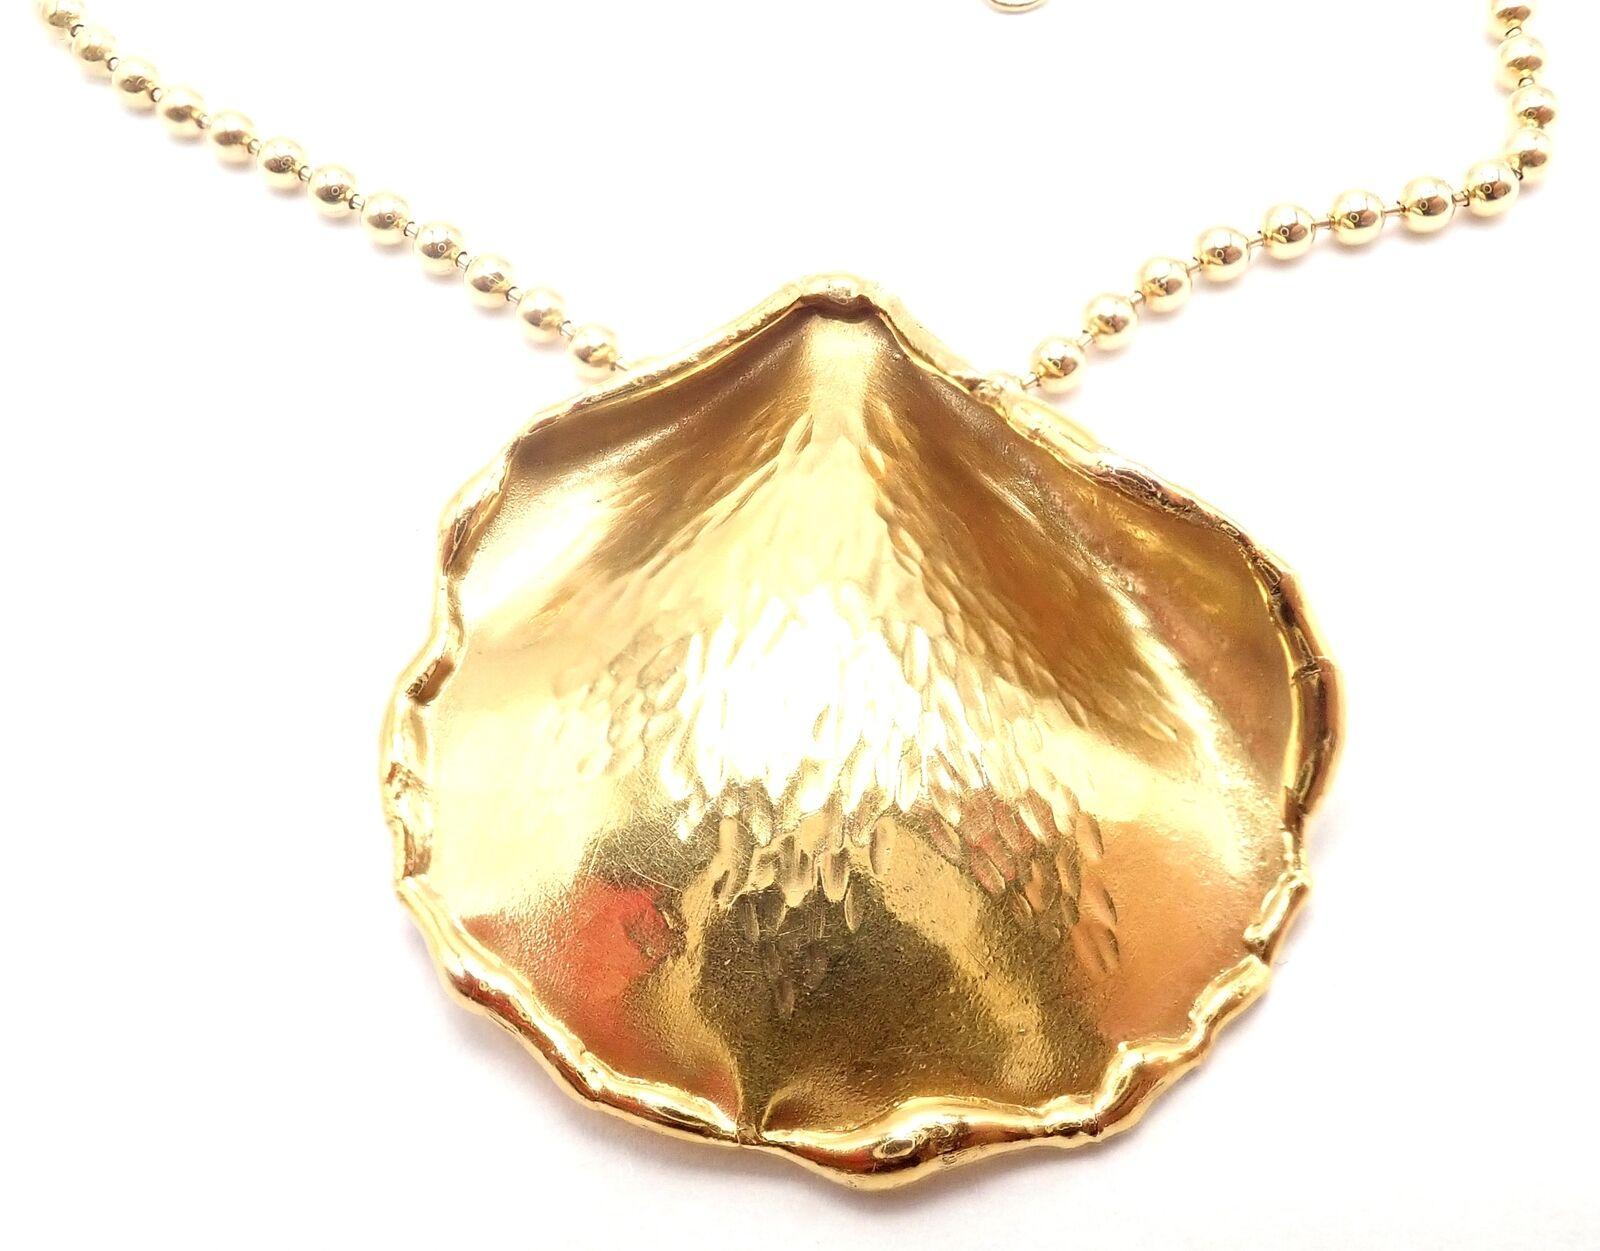 Vintage Tiffany & Co Angela Cummings Rose Petal Yellow Gold Pendant Necklace For Sale 2